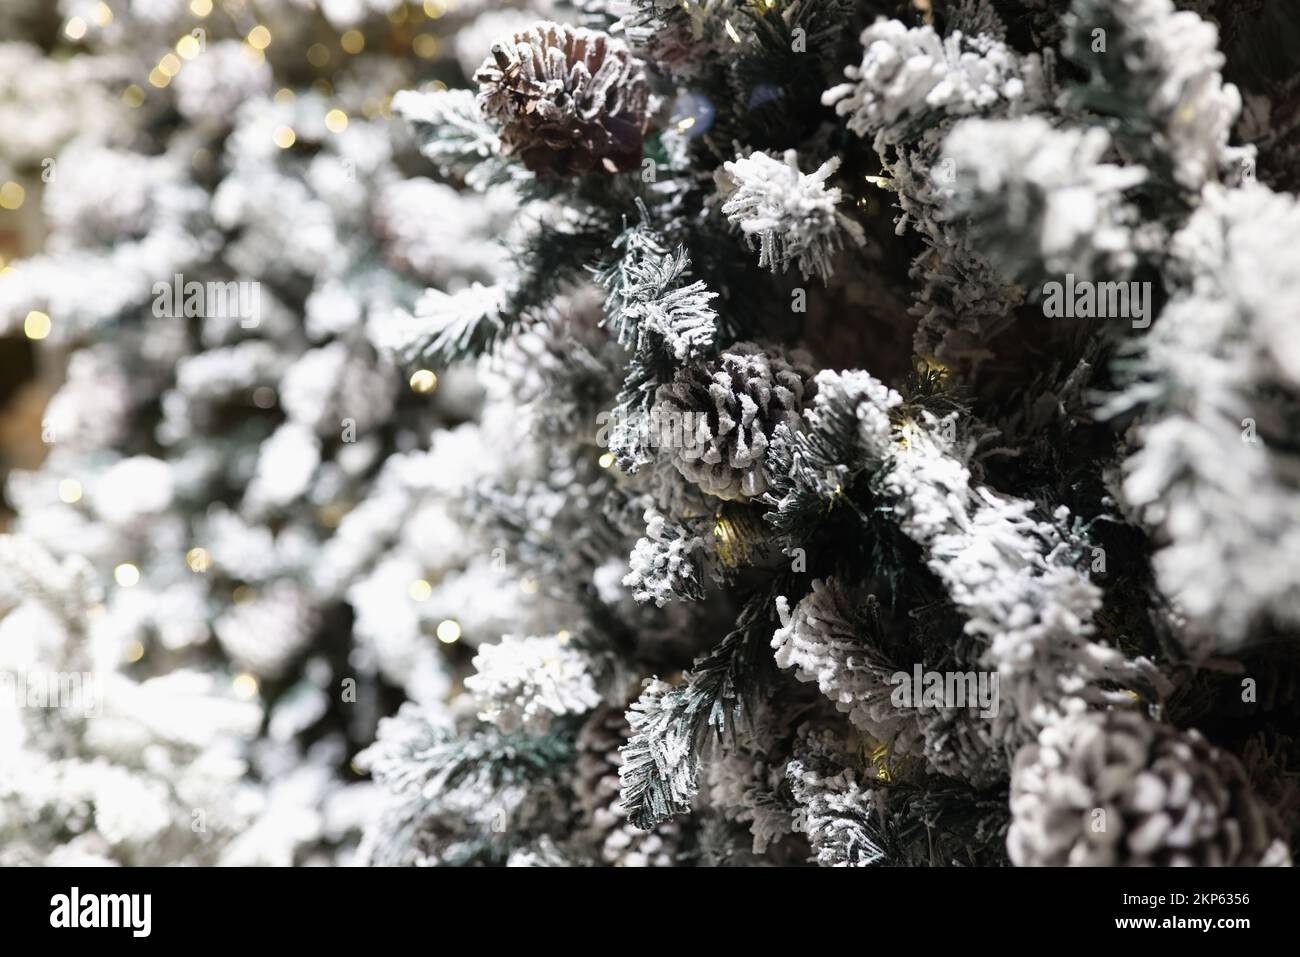 Fir branches in snow with christmas garlands closeup Stock Photo